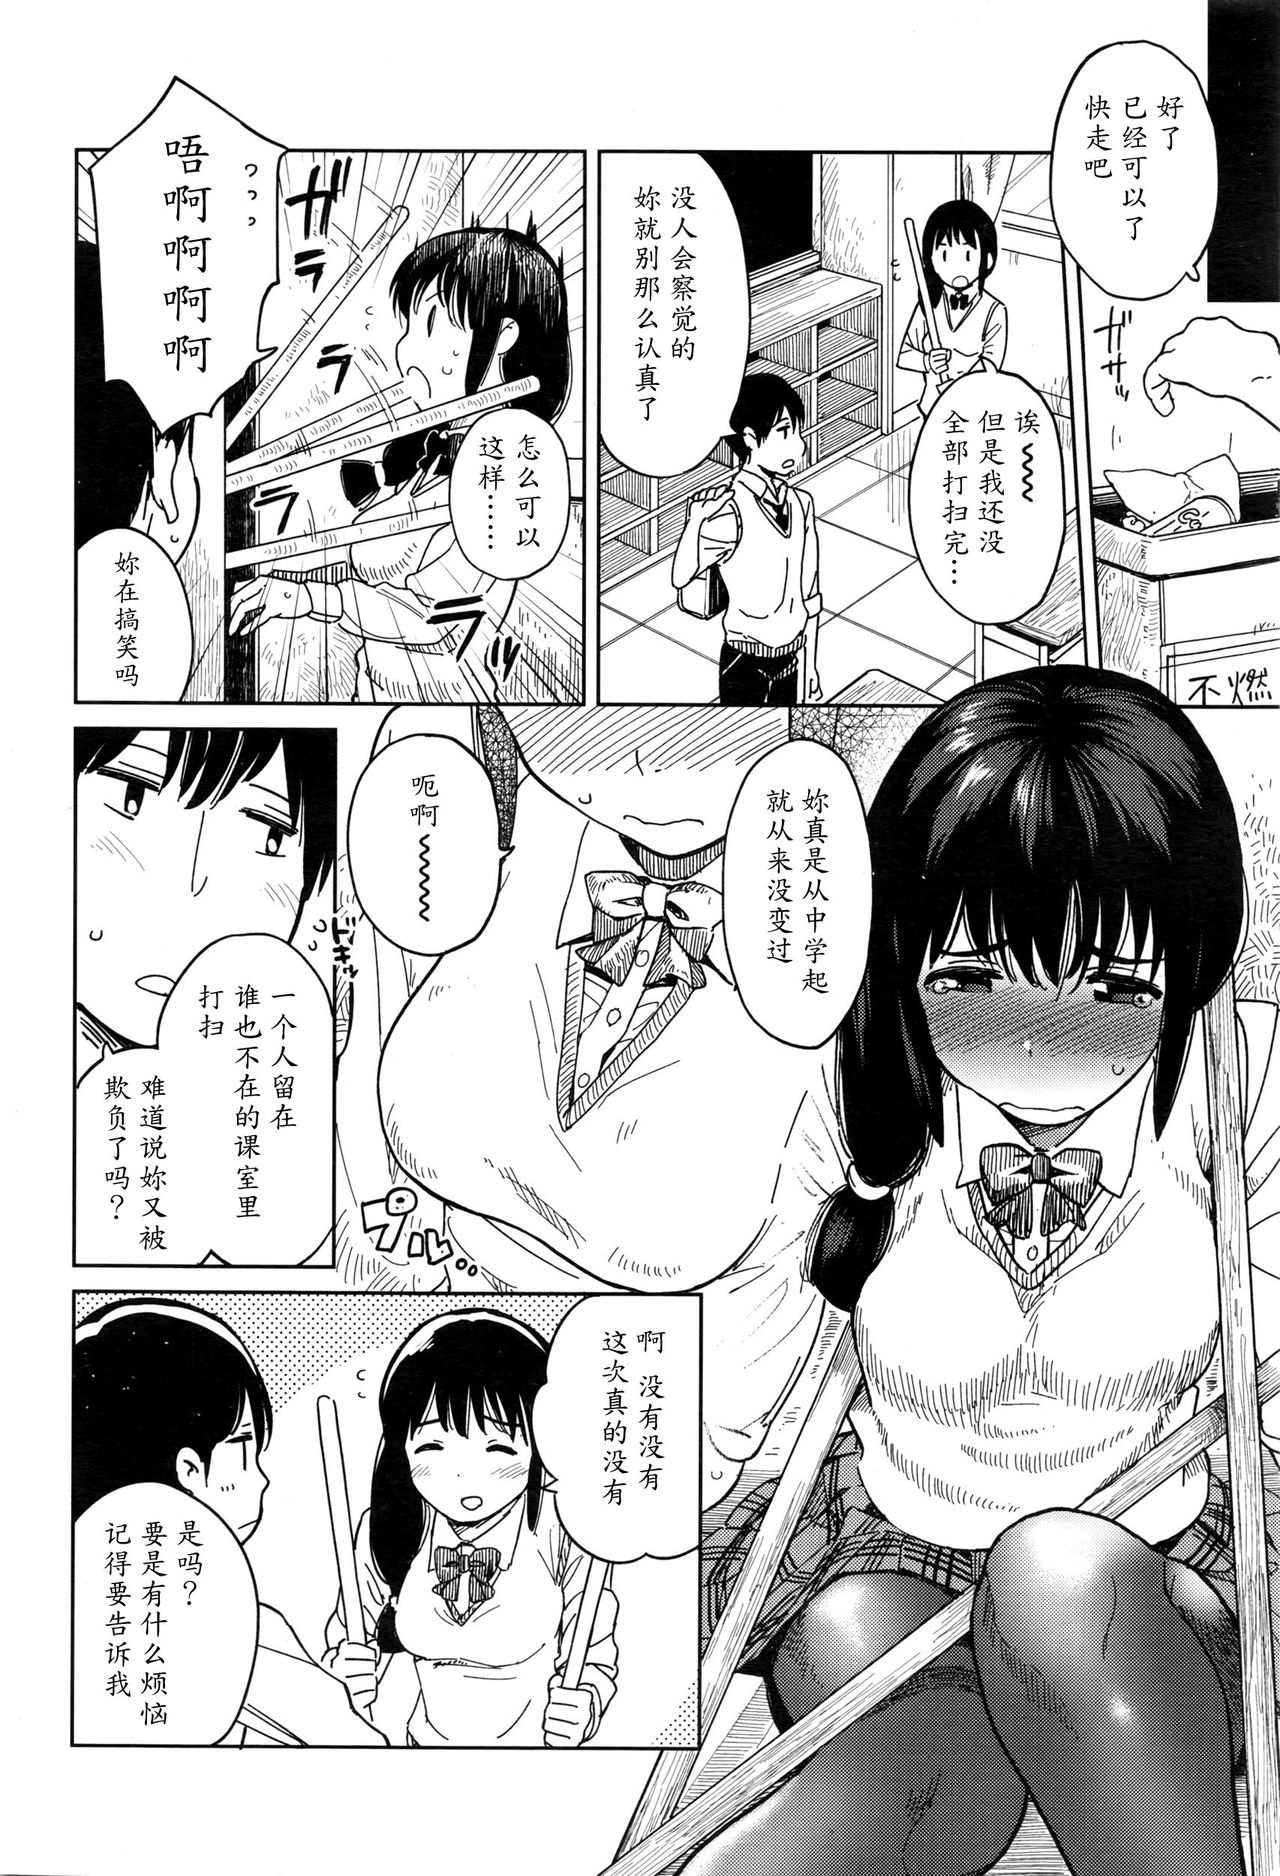 [Shiden] Houkago Rendezvous | Afterschool Rendezvous (COMIC Koh 2017-01) [Chinese] [魔劍个人汉化] [しでん] 放課後ランデブー (COMIC 高 2017年1月号) [中国翻訳]